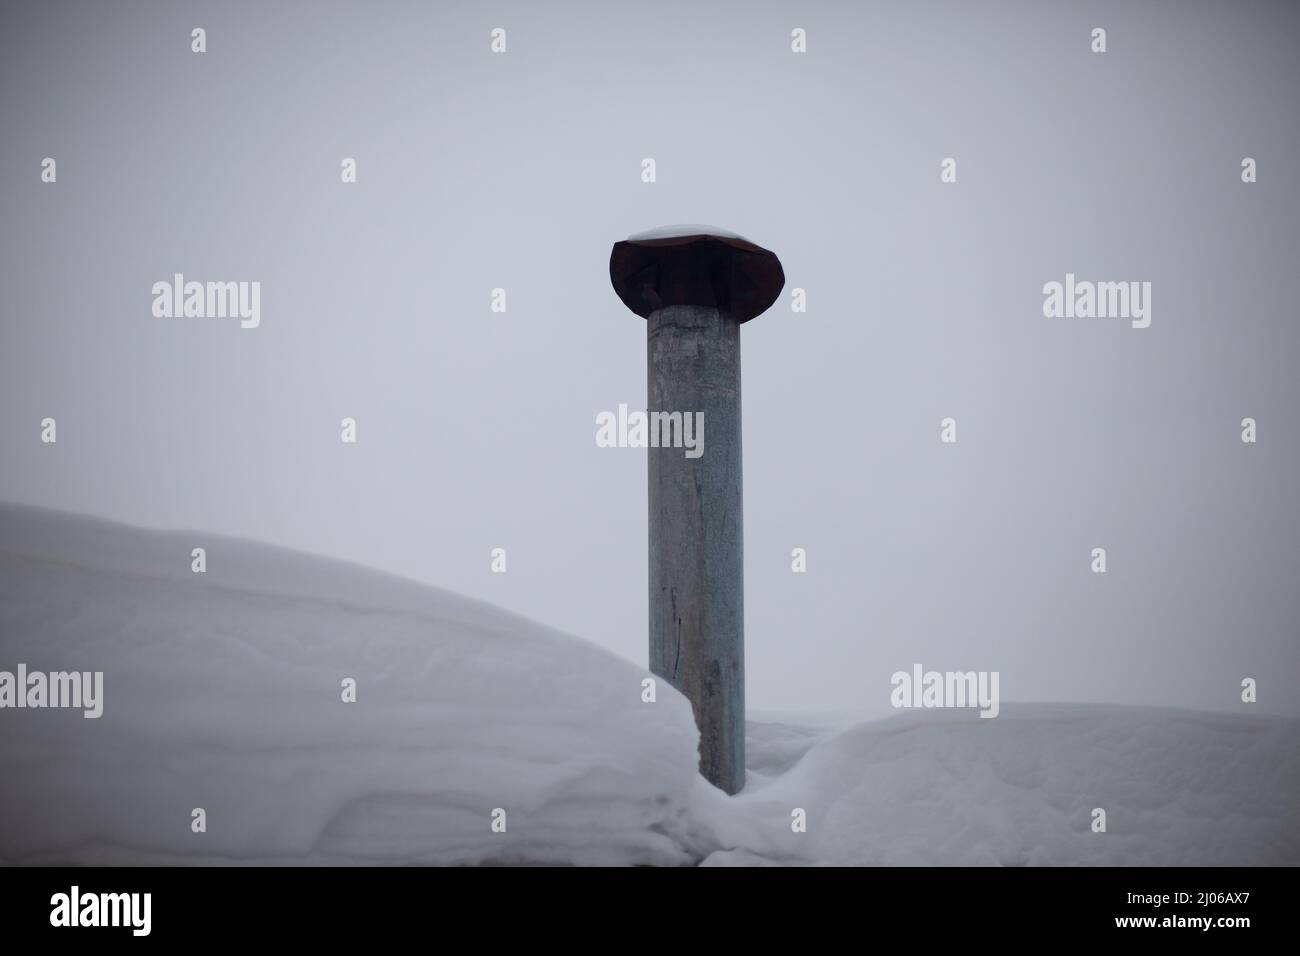 Chimney on roof. Stainless steel heat dissipation pipe. Chimney from furnace. Snowy weather outside. Stock Photo